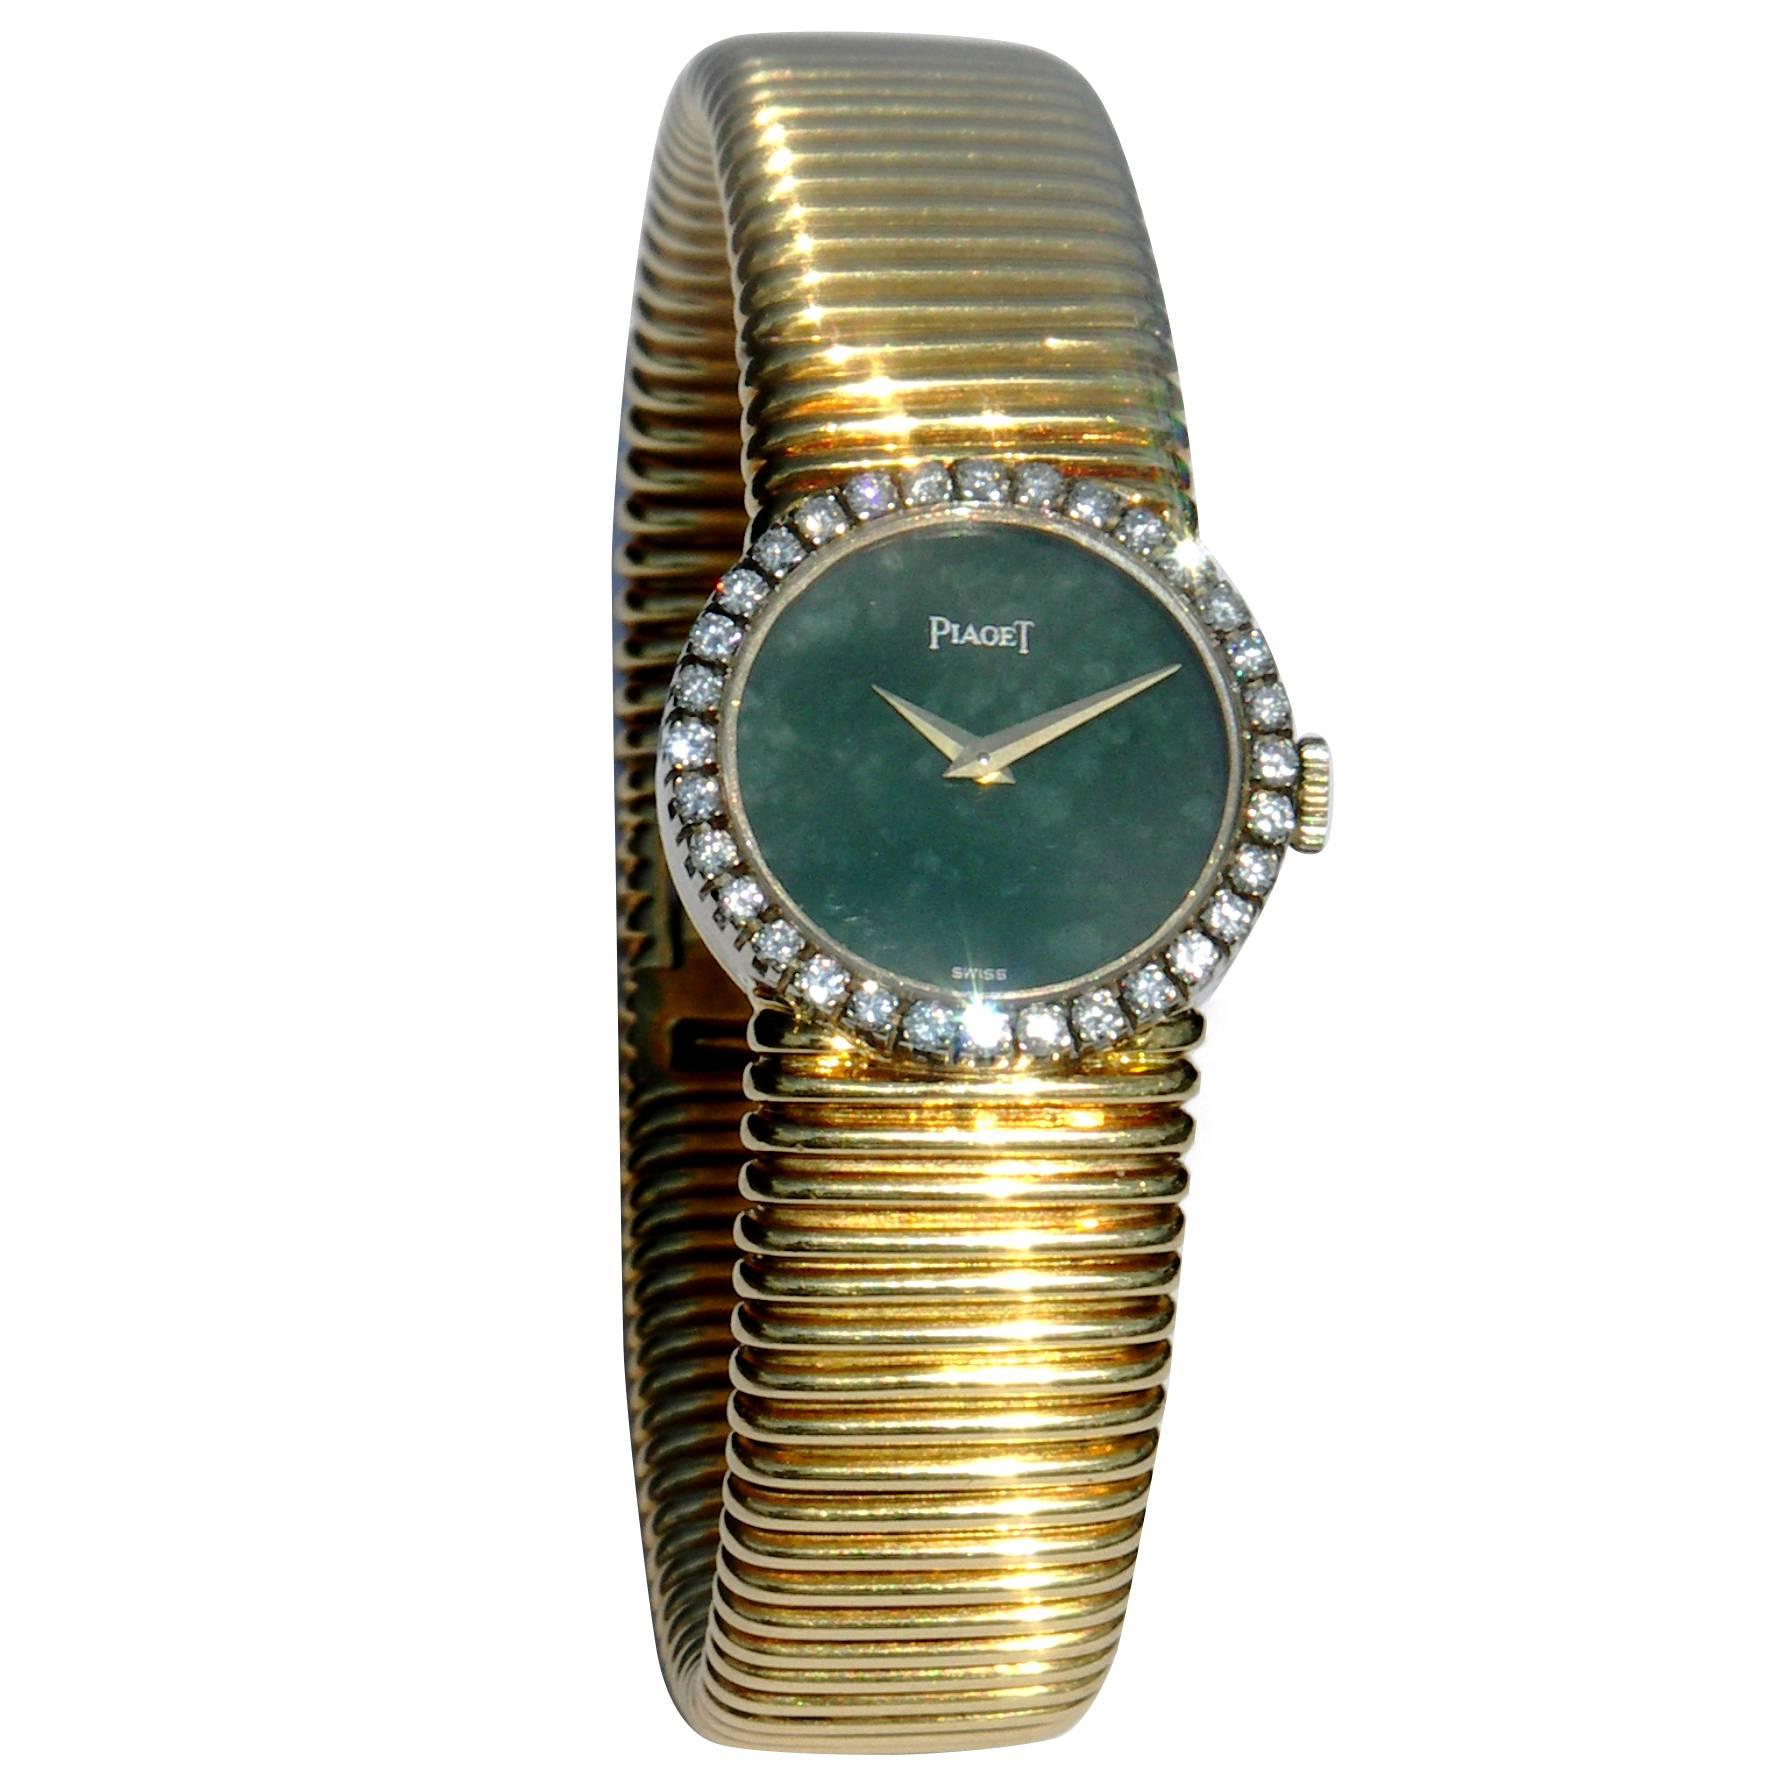 Ladies 18K yellow gold Piaget wristwatch, featuring a "Tubo Gas" style bracelet. Set with a total of approximately 1ct of round brilliant cut diamonds, and jade dial. Bracelet measures 6 7/8 inches.